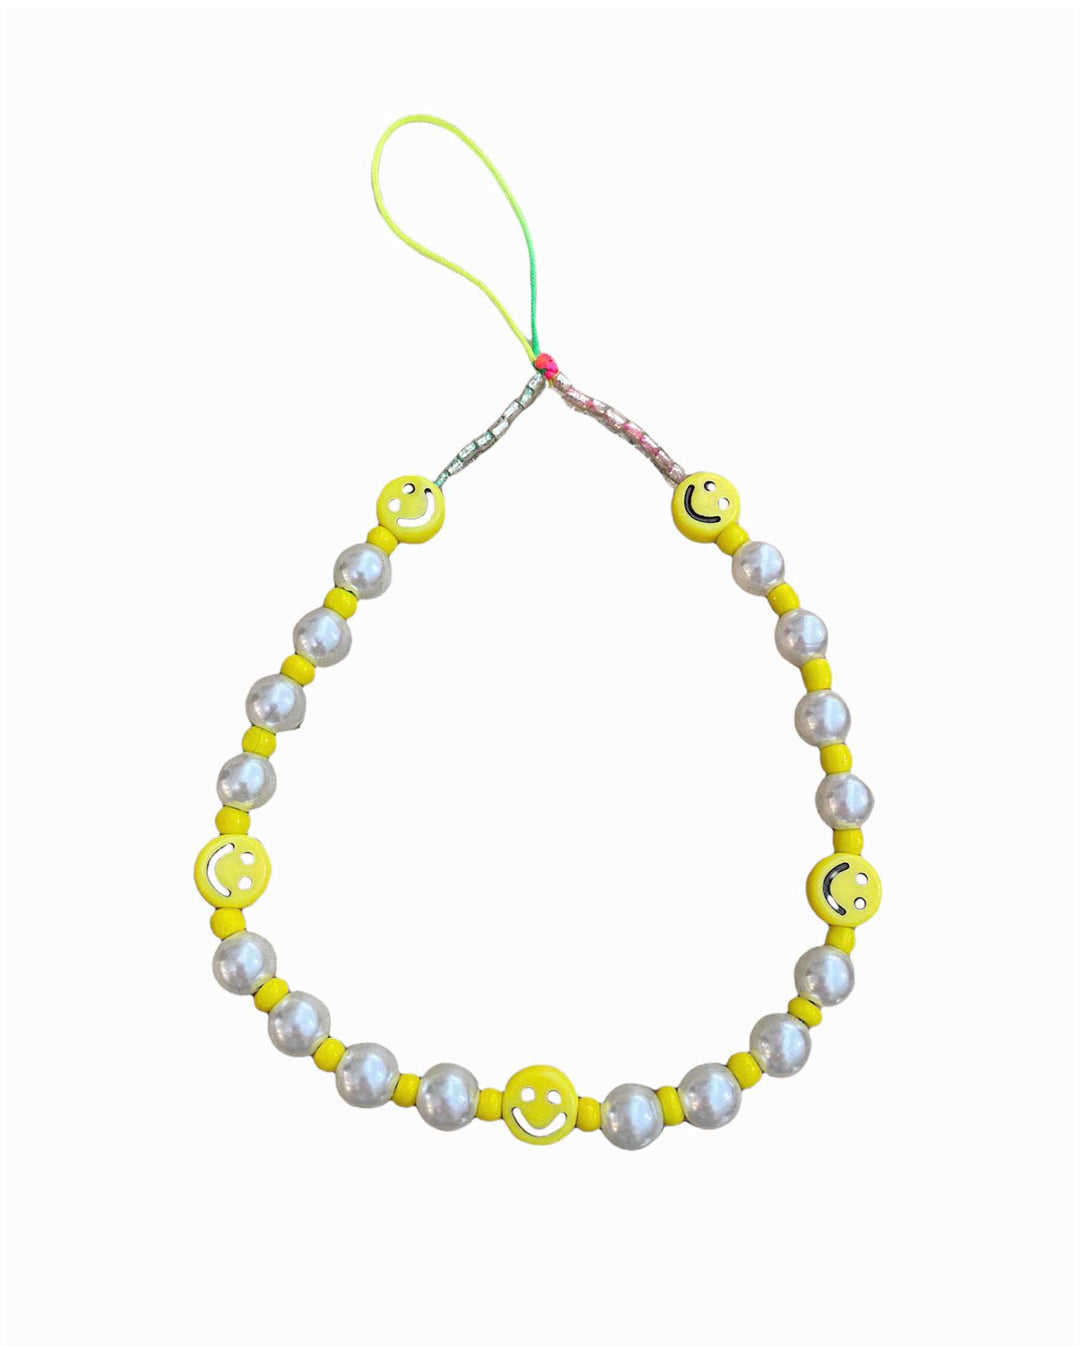 YELLOW SMILEY PHONE CHARM - Kingfisher Road - Online Boutique